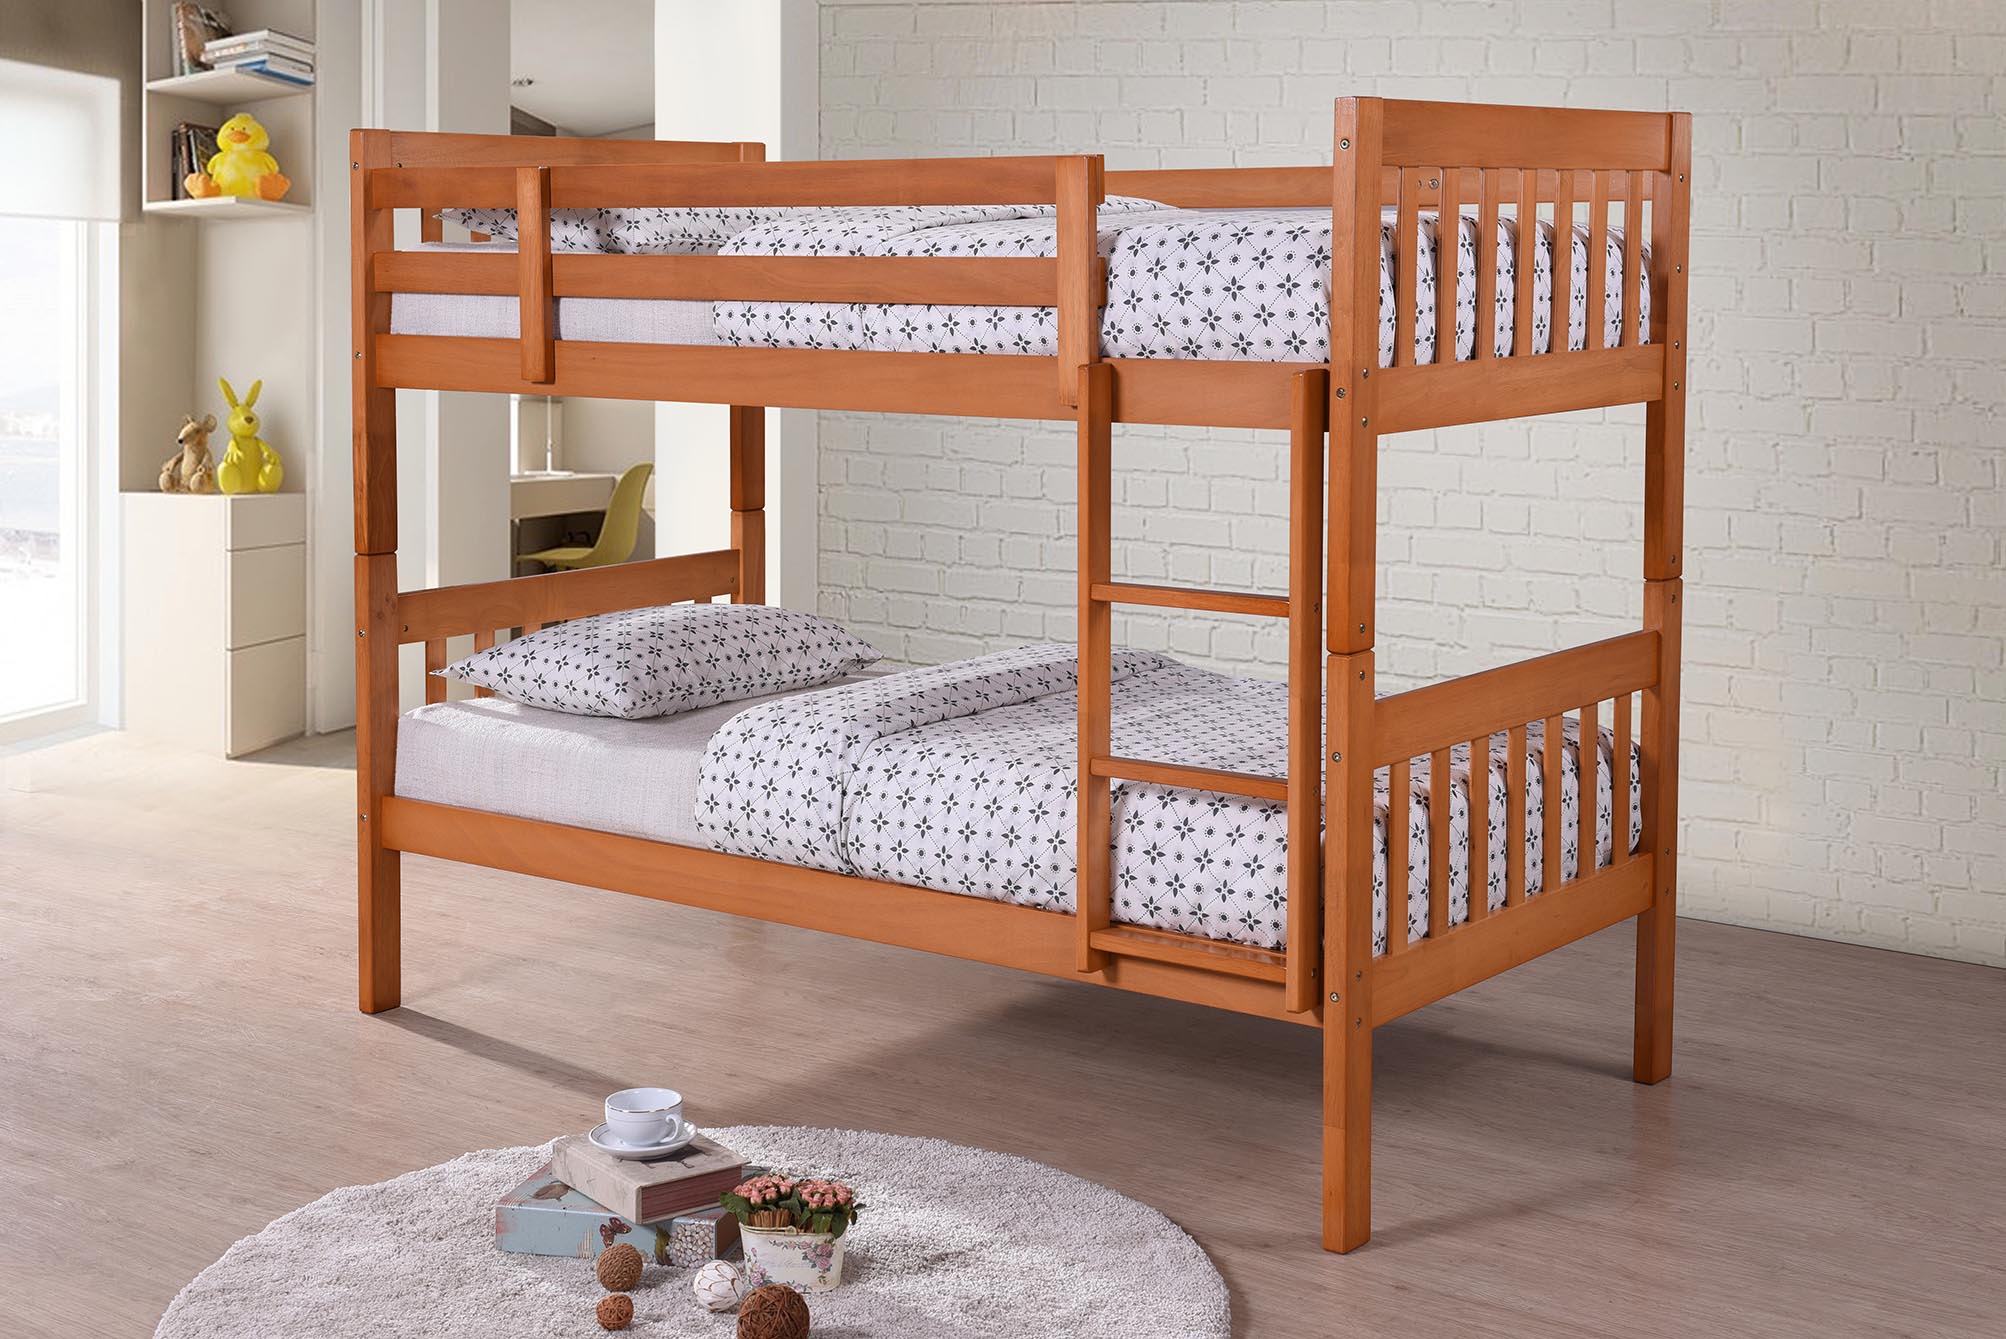 An image of Nia Wooden Bunk Bed